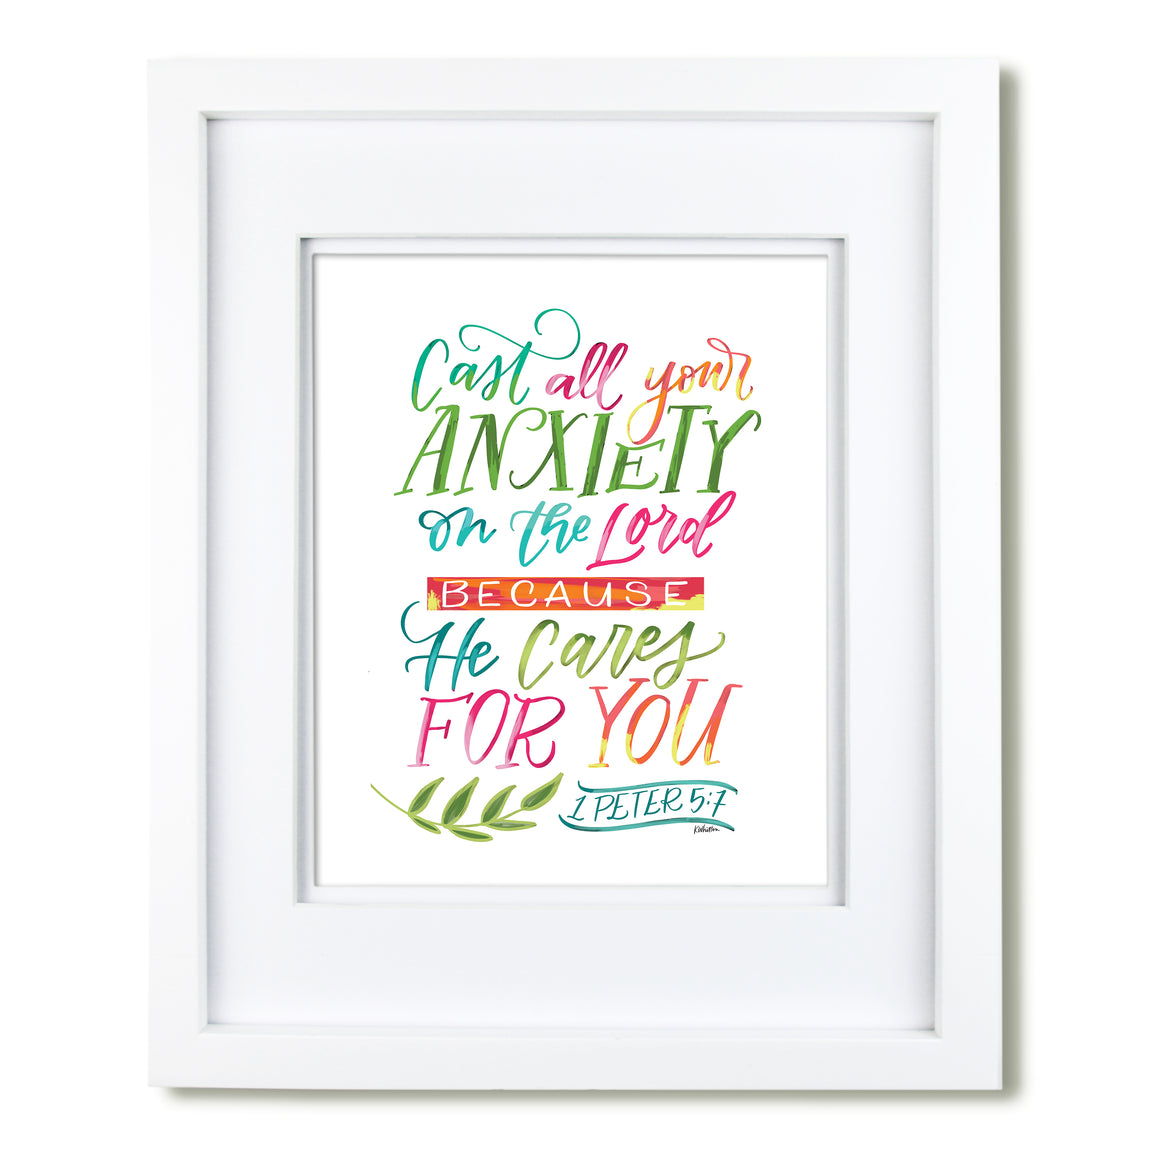 "Cast all your Anxiety on the Lord" scripture art print